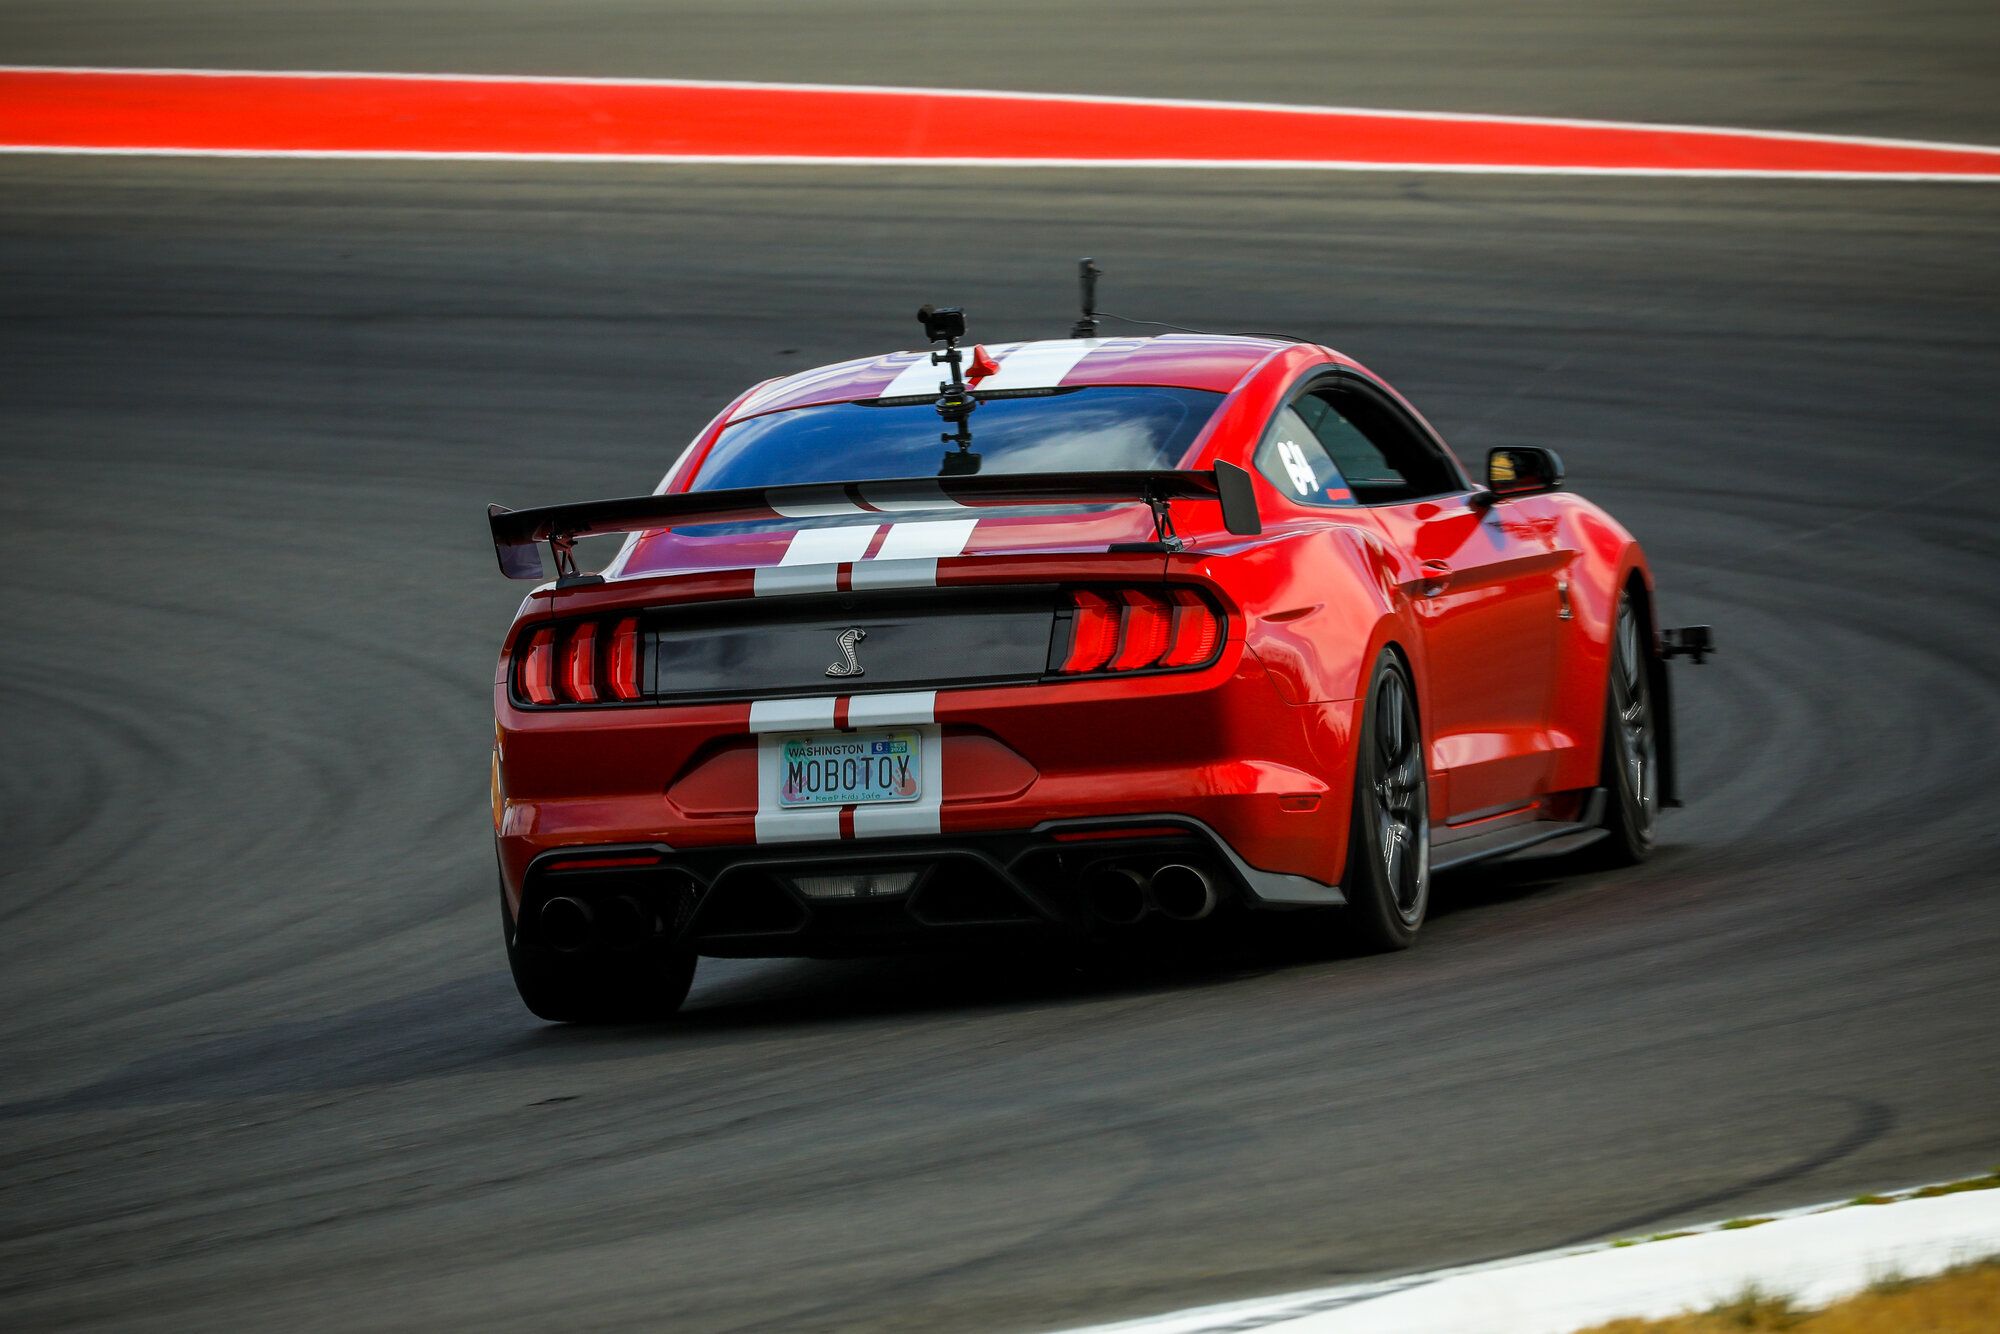 2020 Mustang
GT500  (MOBOTOY)